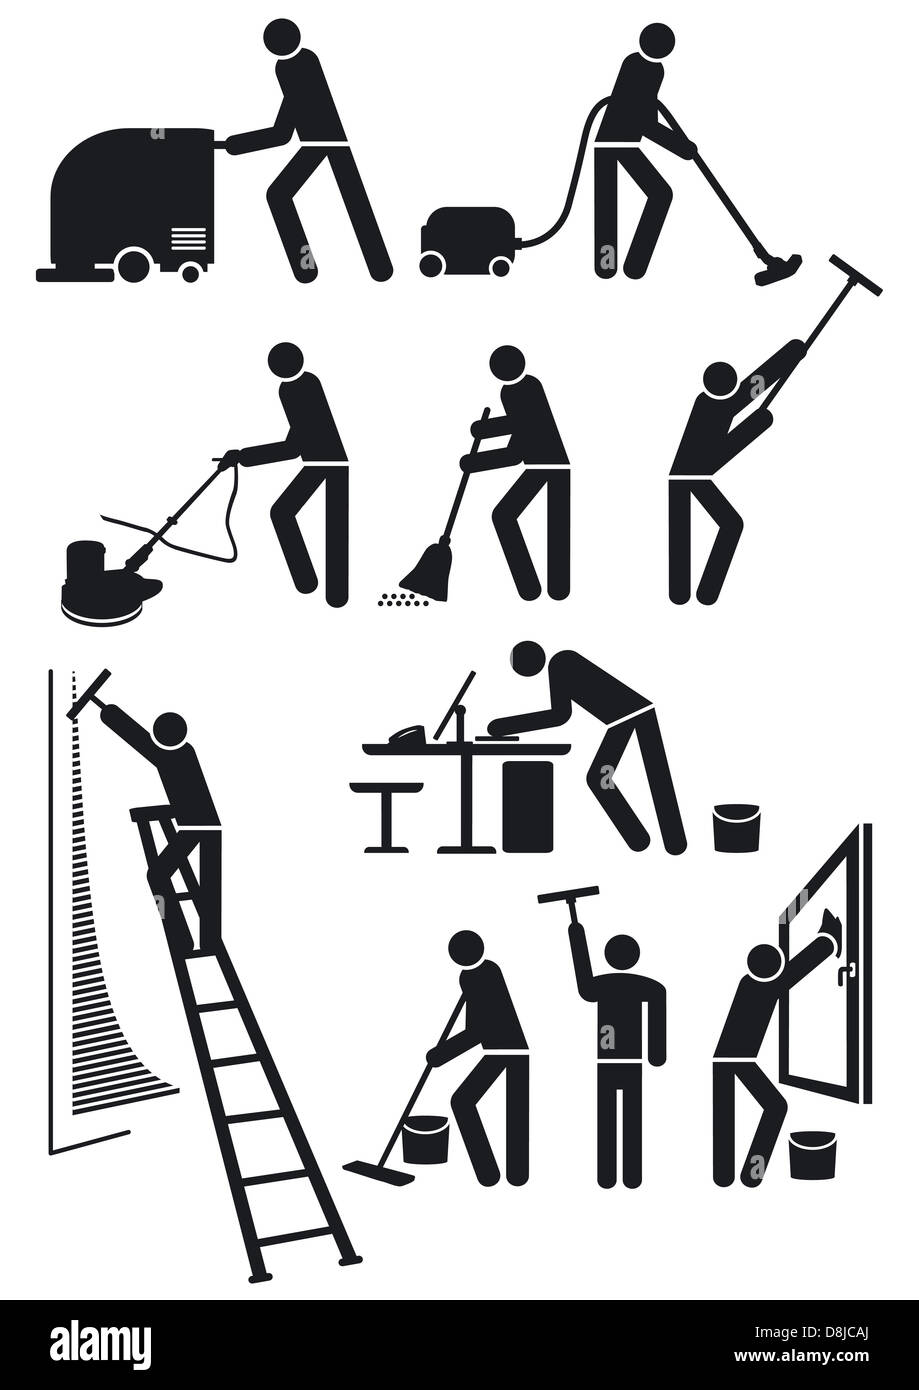 cleaners pictogram Stock Photo